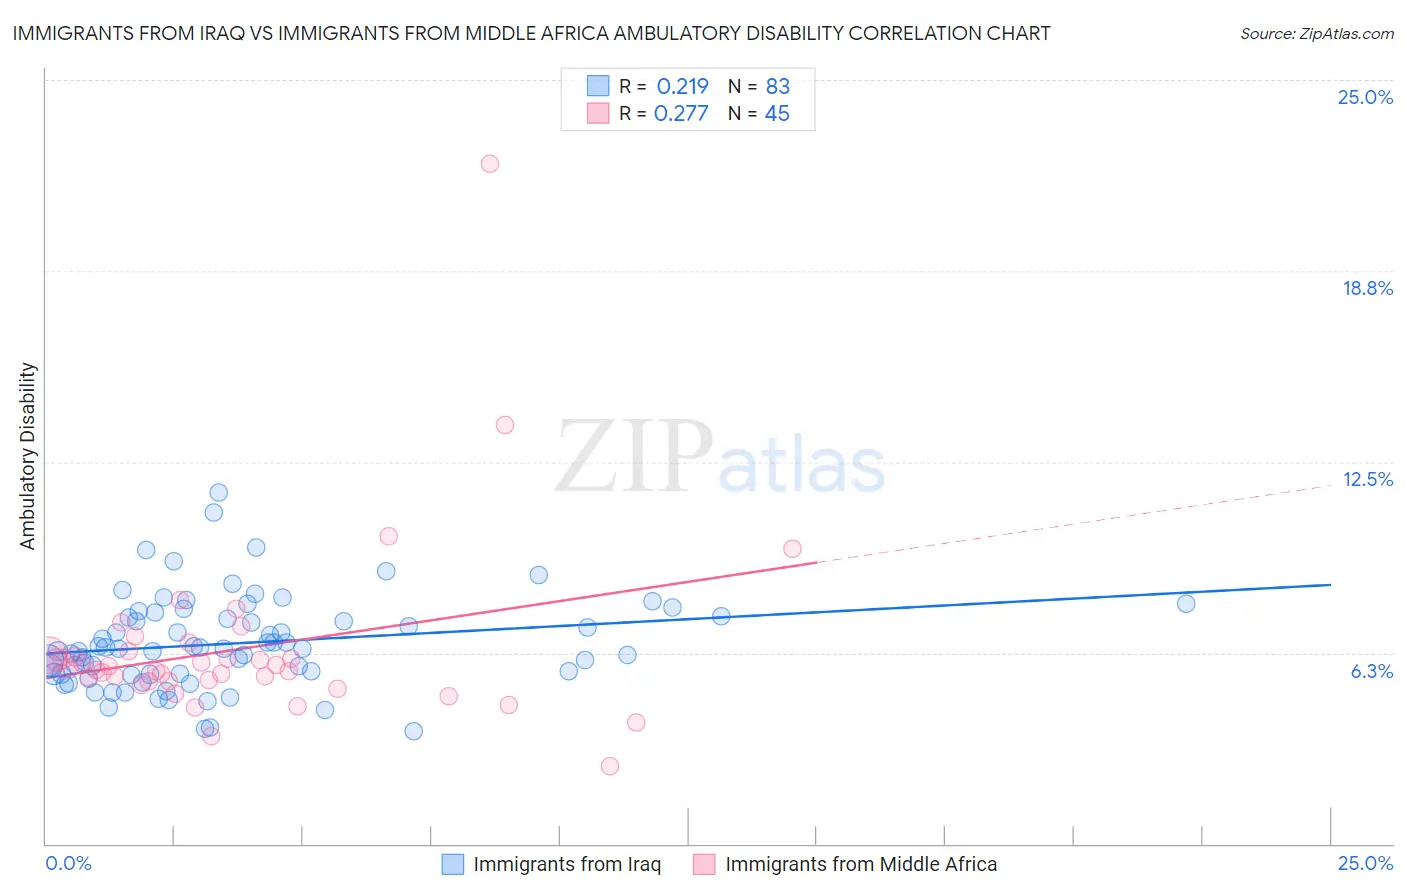 Immigrants from Iraq vs Immigrants from Middle Africa Ambulatory Disability